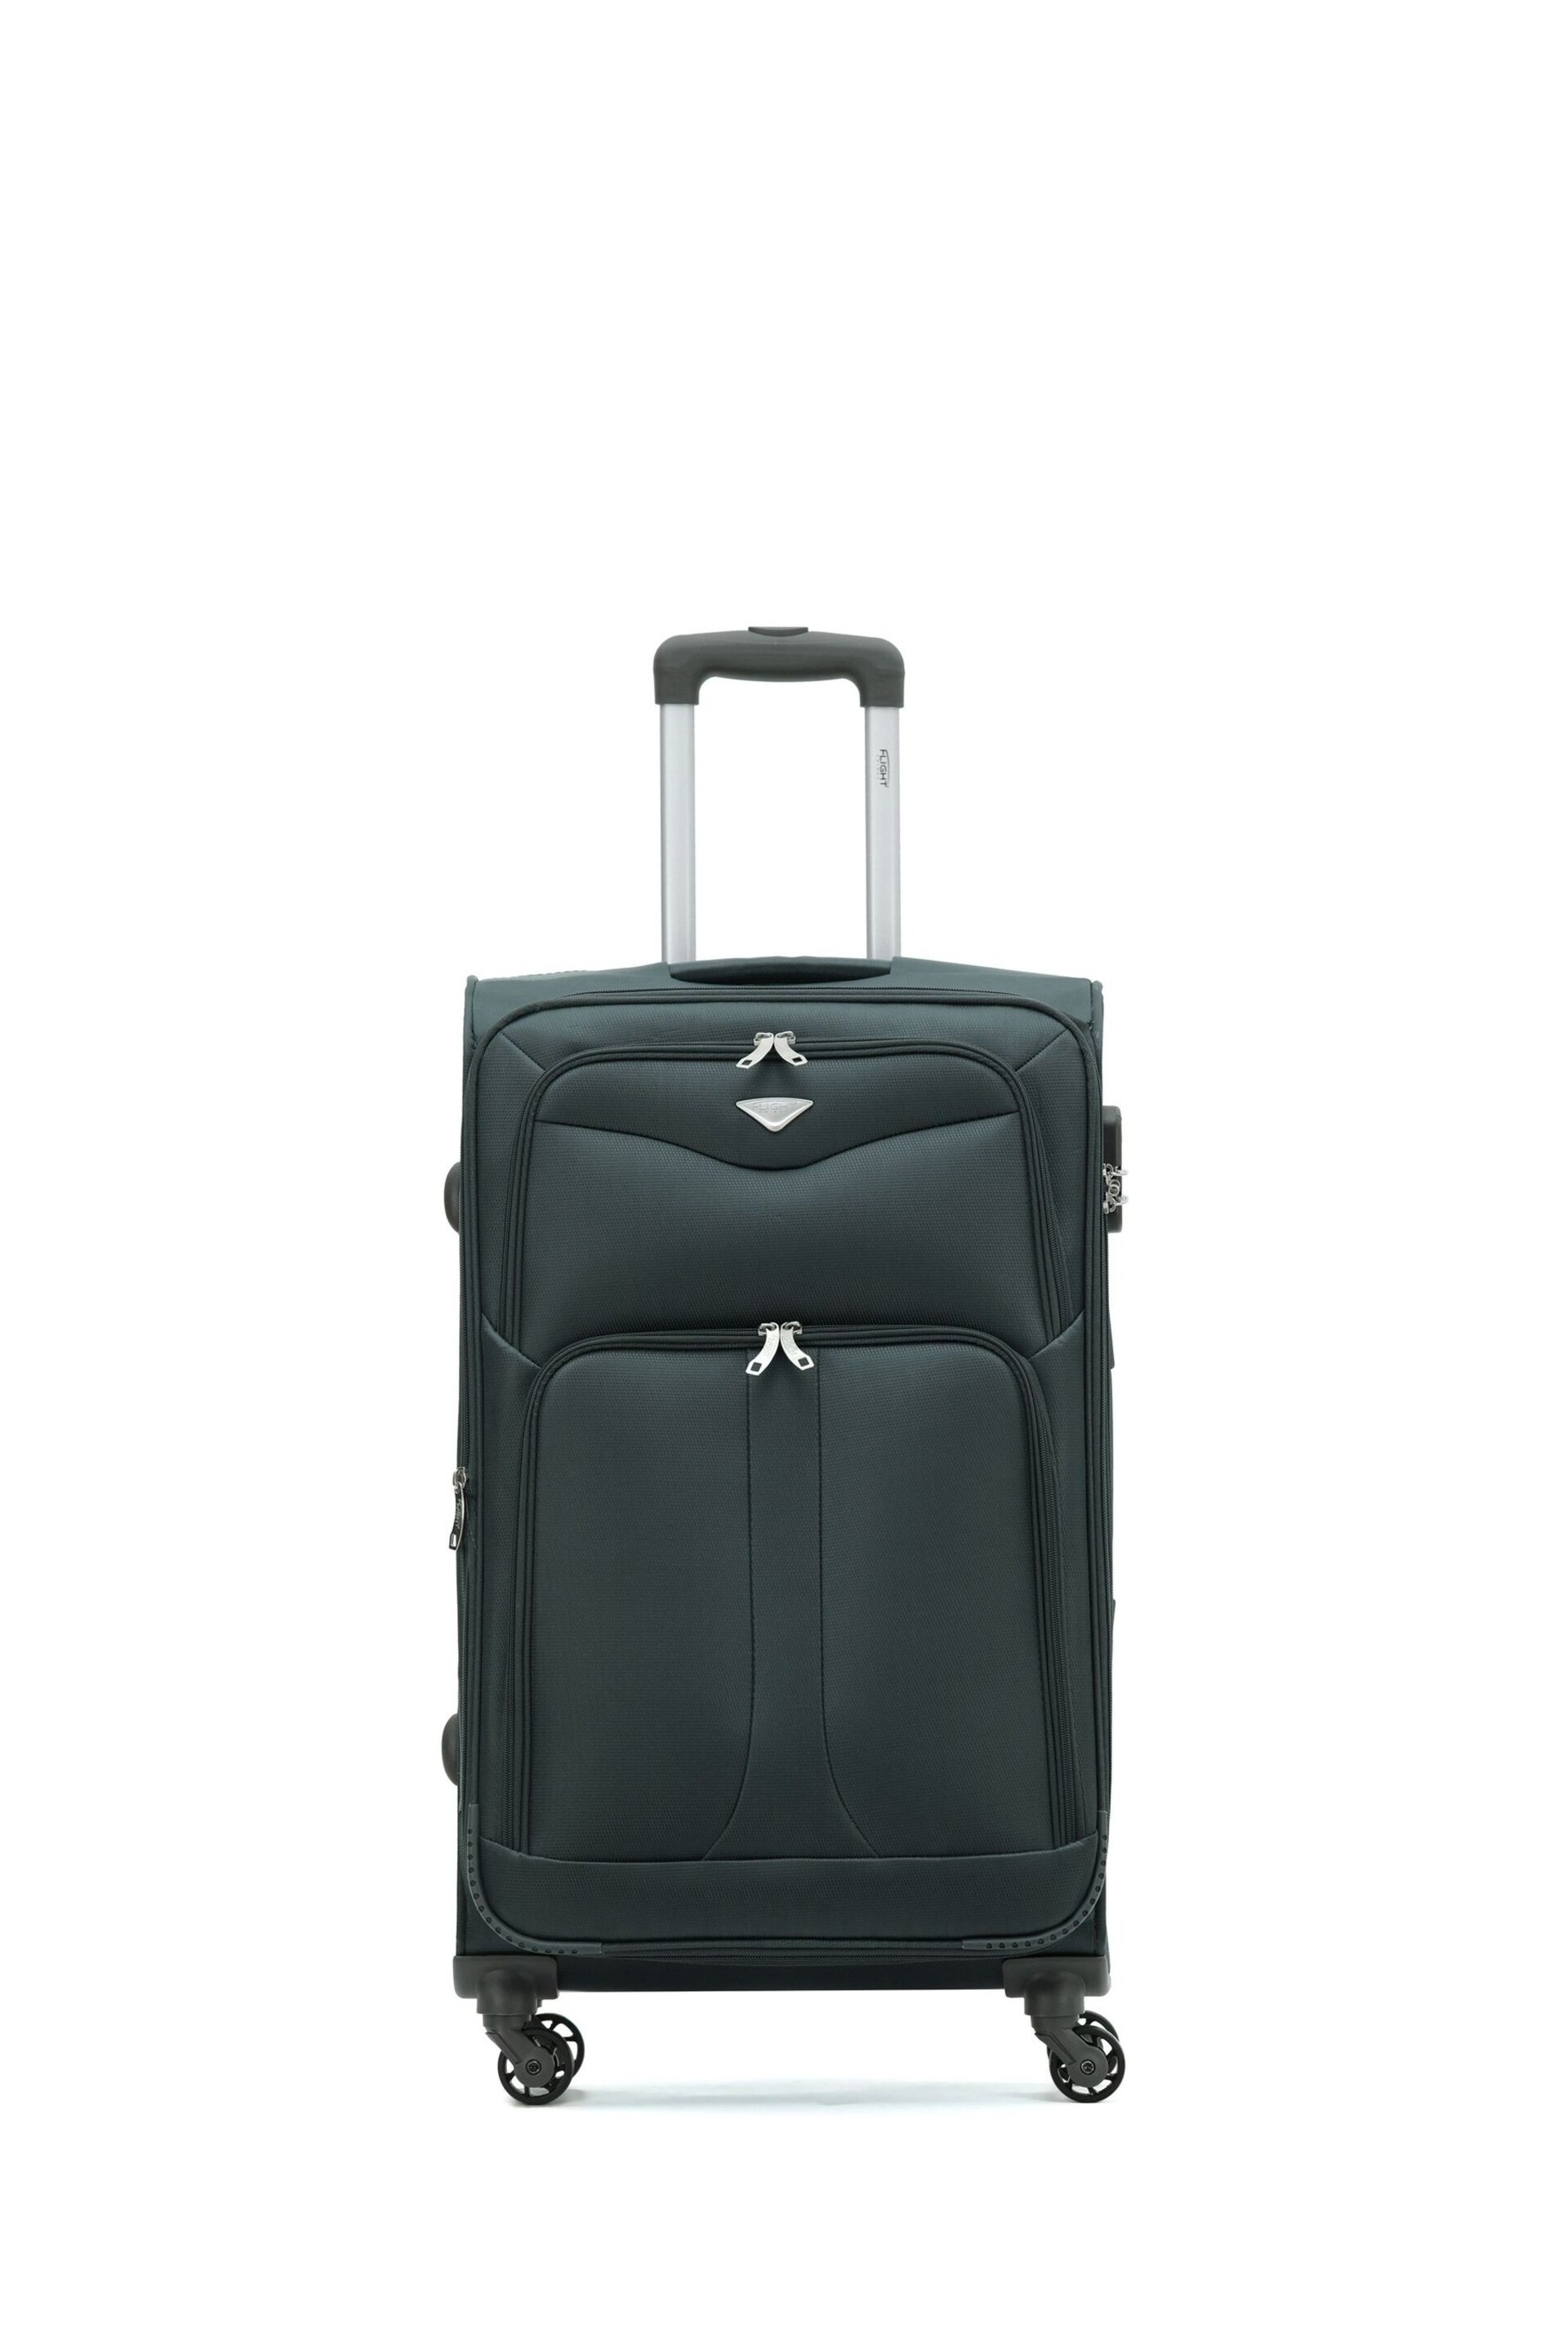 Flight Knight Medium Softcase Lightweight Check-In Suitcase With 4 Wheels - Image 1 of 6